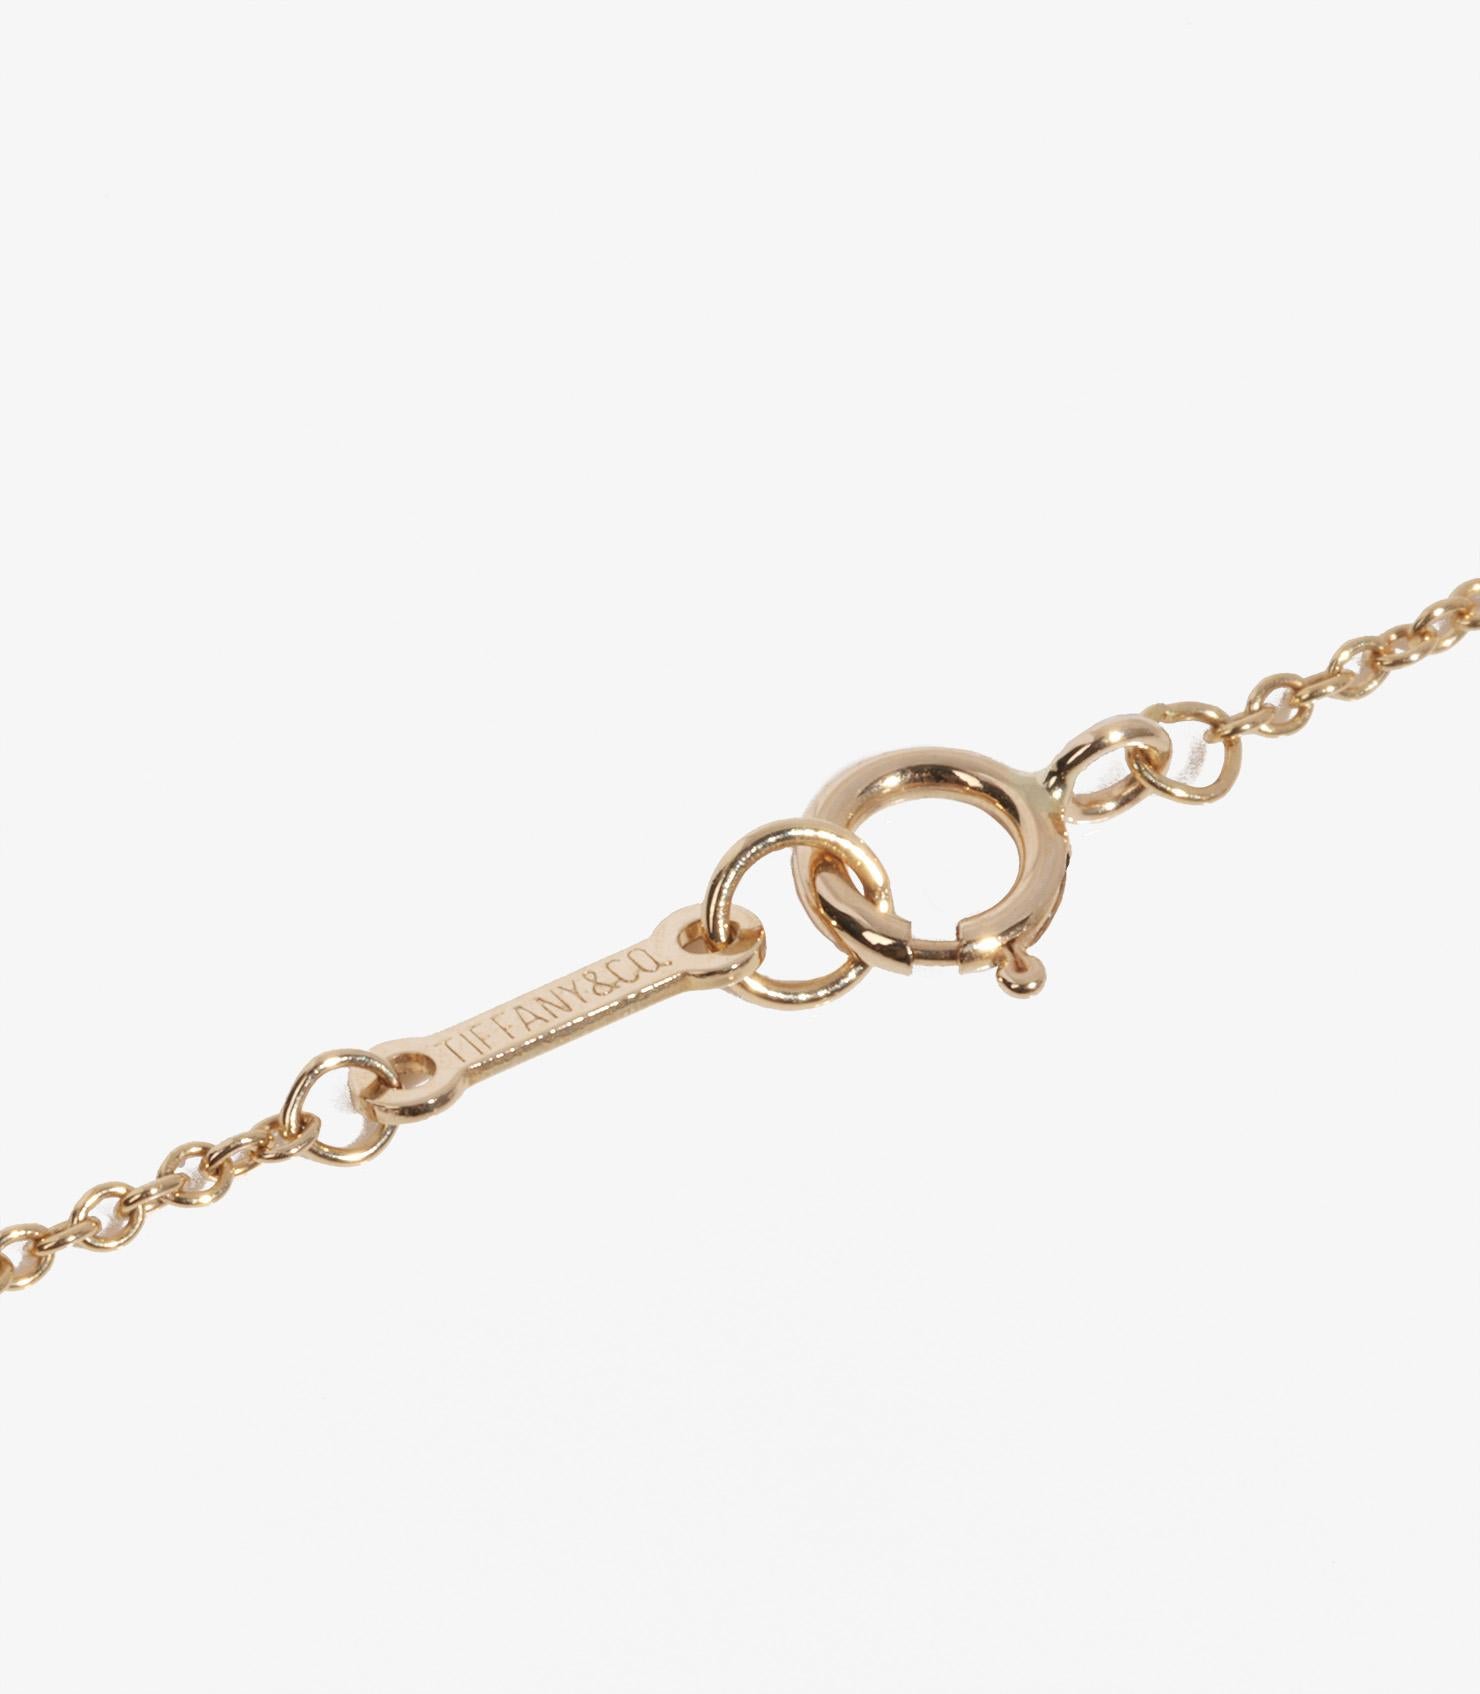 Tiffany & Co. 18ct Yellow Gold Elsa Peretti 11mm Bean Design Pendant

Brand- Tiffany & Co.
Model- Bean Design Necklace
Product Type- Necklace
Material(s)- 18ct Yellow Gold

Necklace Length- 40.5cm
Pendant Length- 1.1cm
Pendant Width- 0.8cm
Total